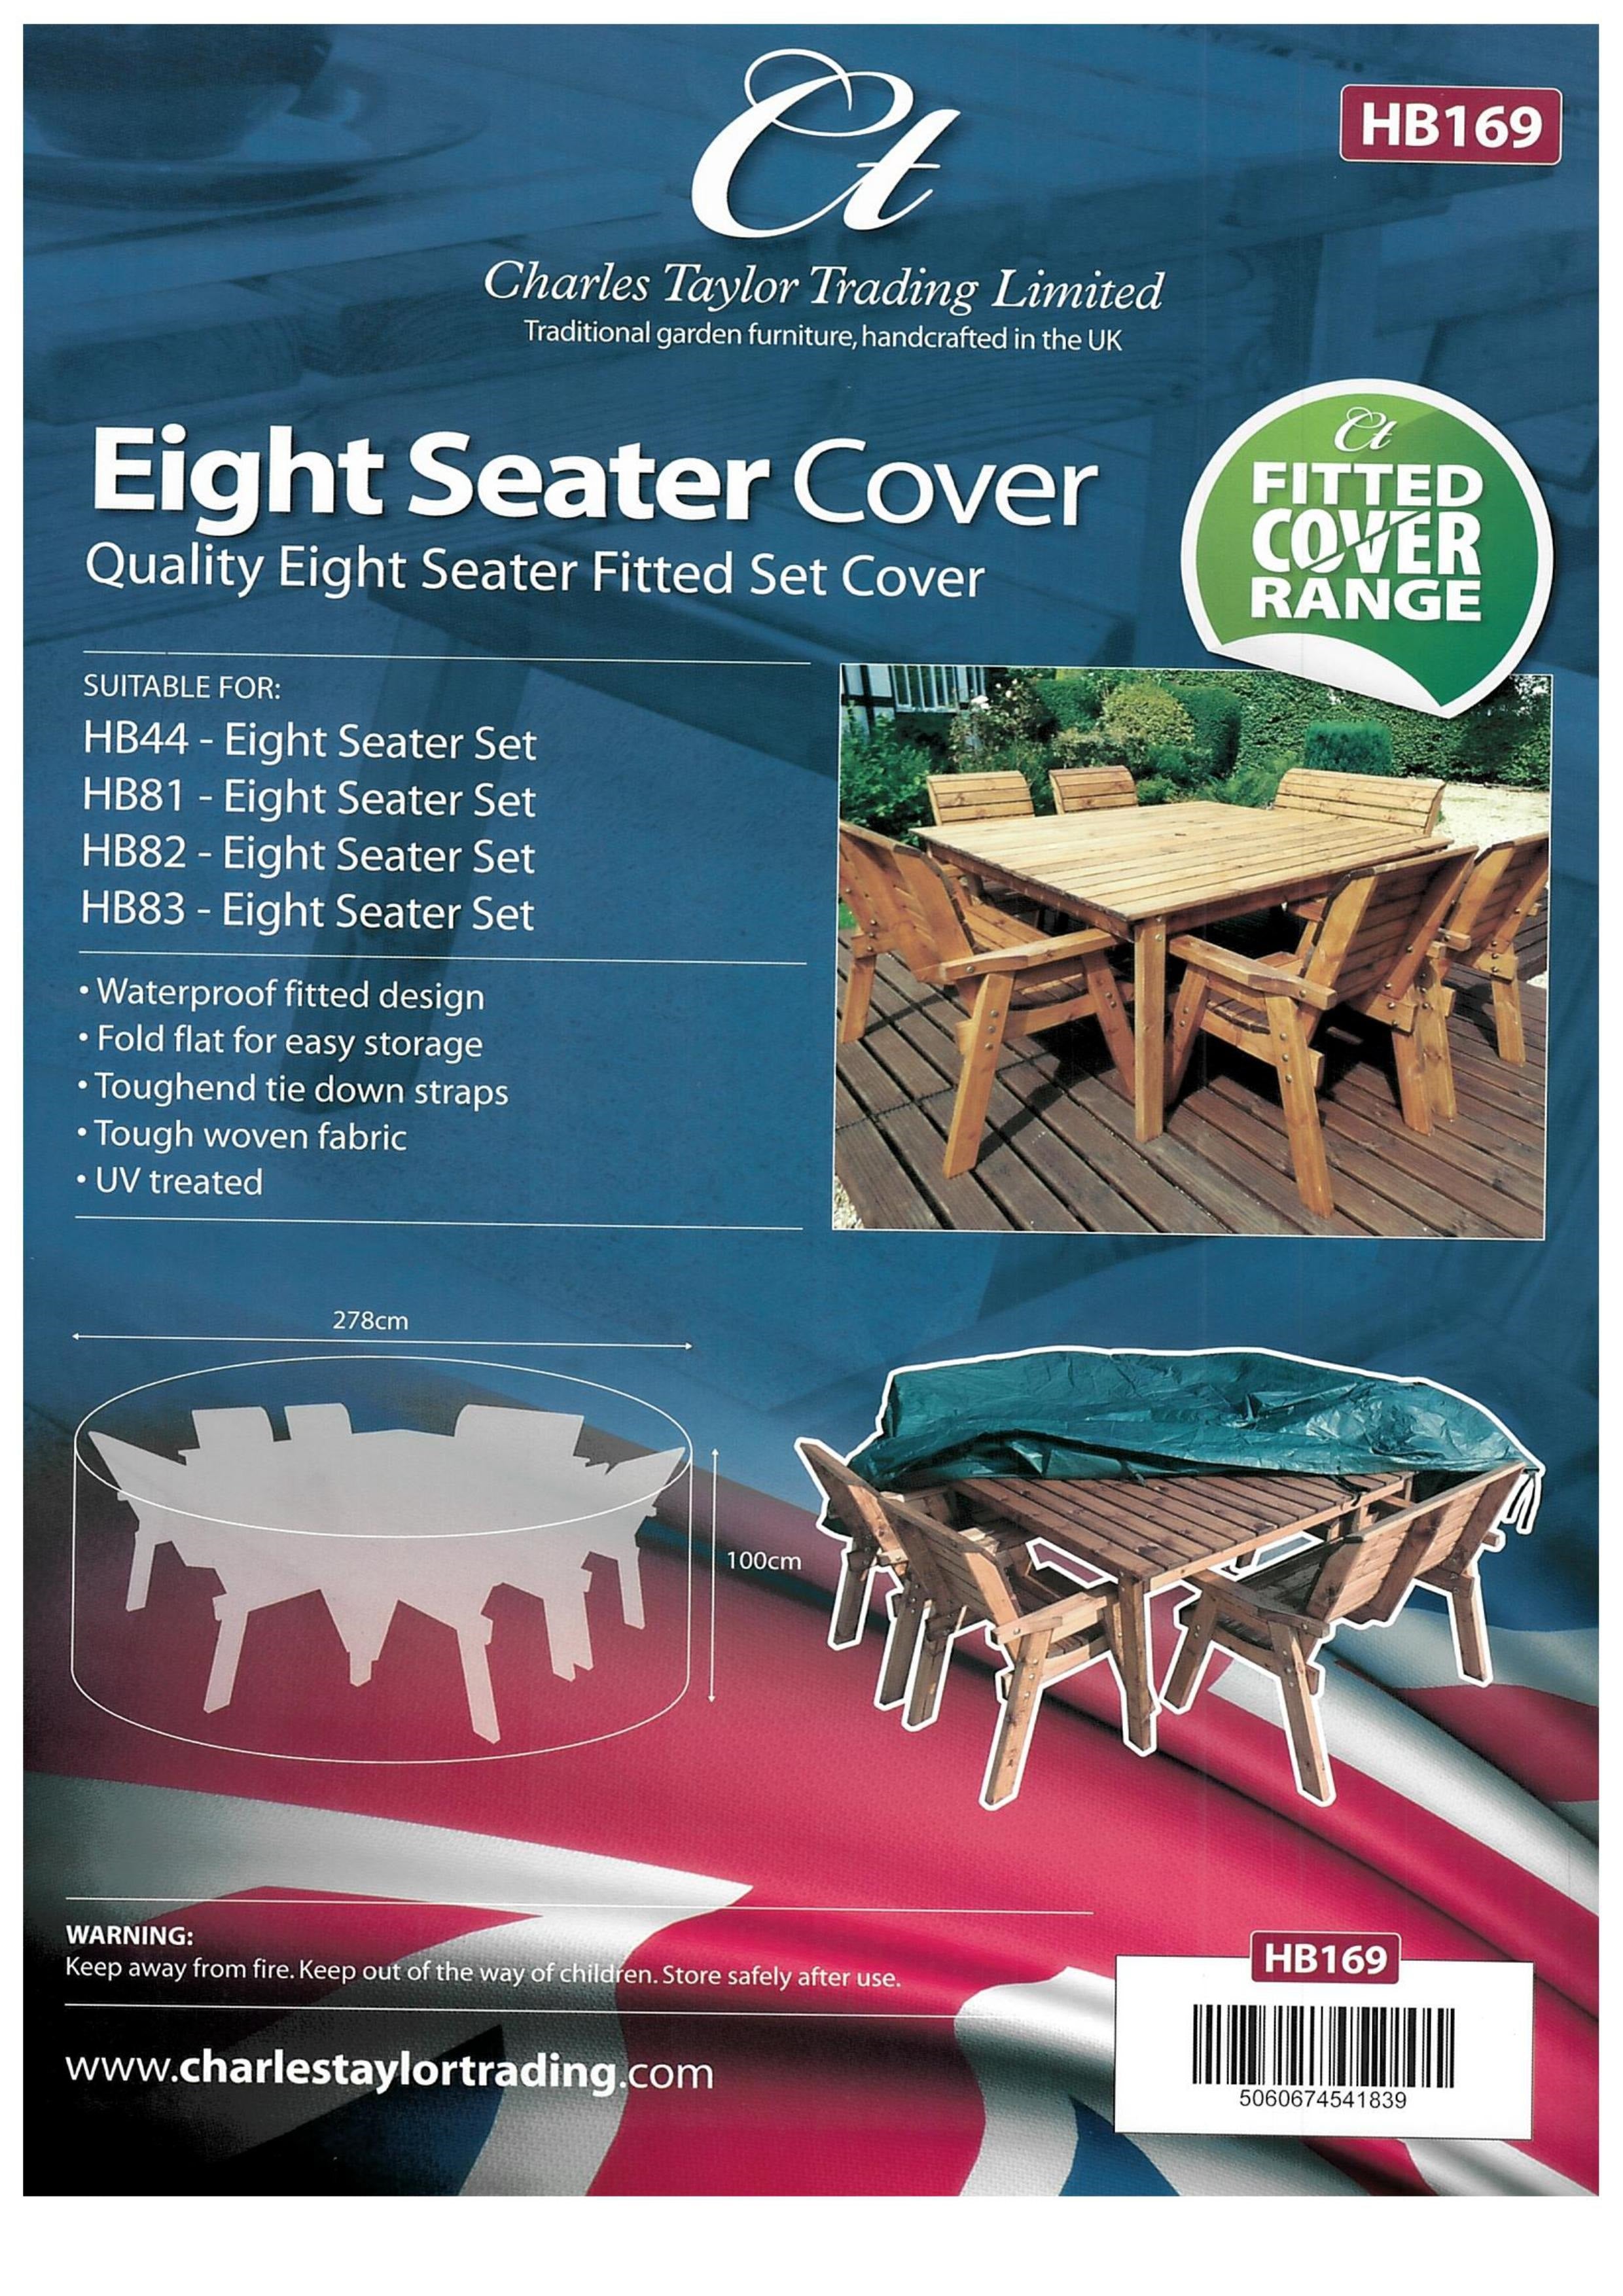 HB169 - Eight Seater Square Deluxe Table Set Cover